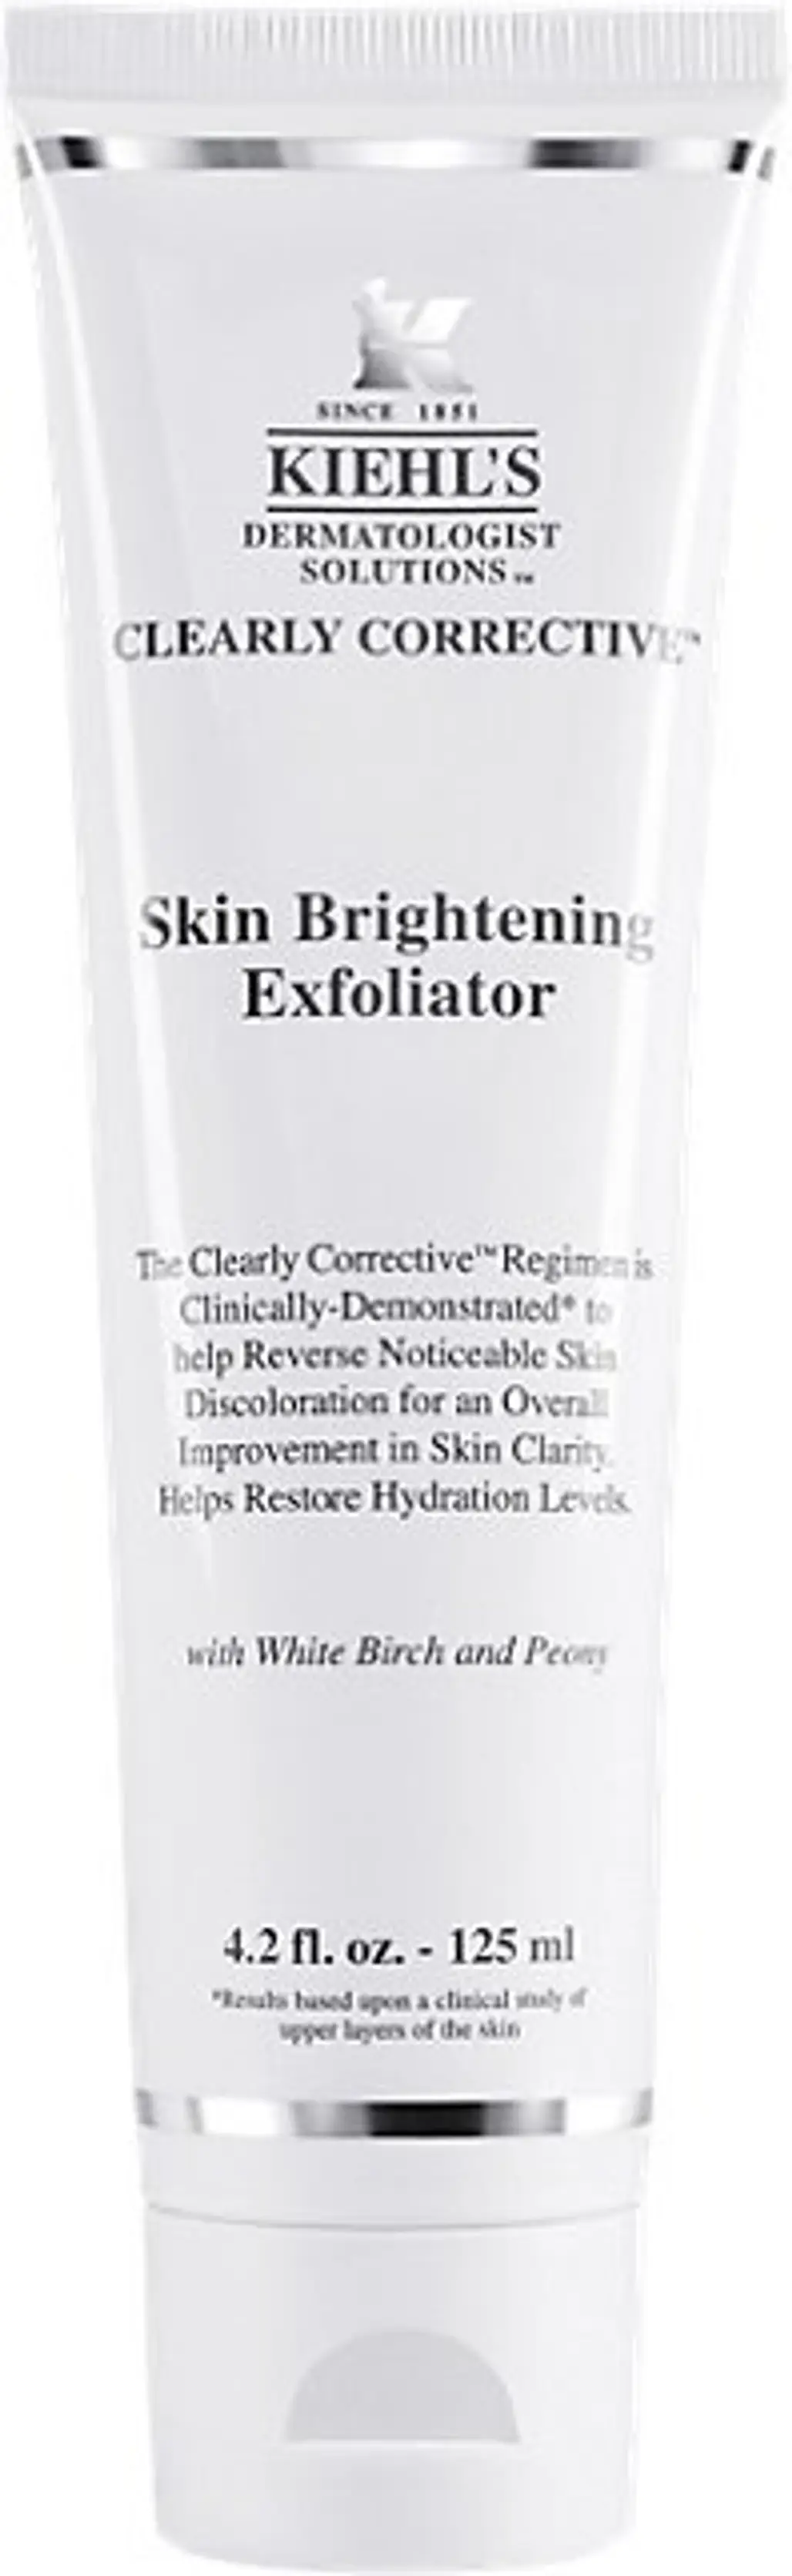 Kiehl's since 1851 Clearly Corrective Skin Brightening Exfoliator